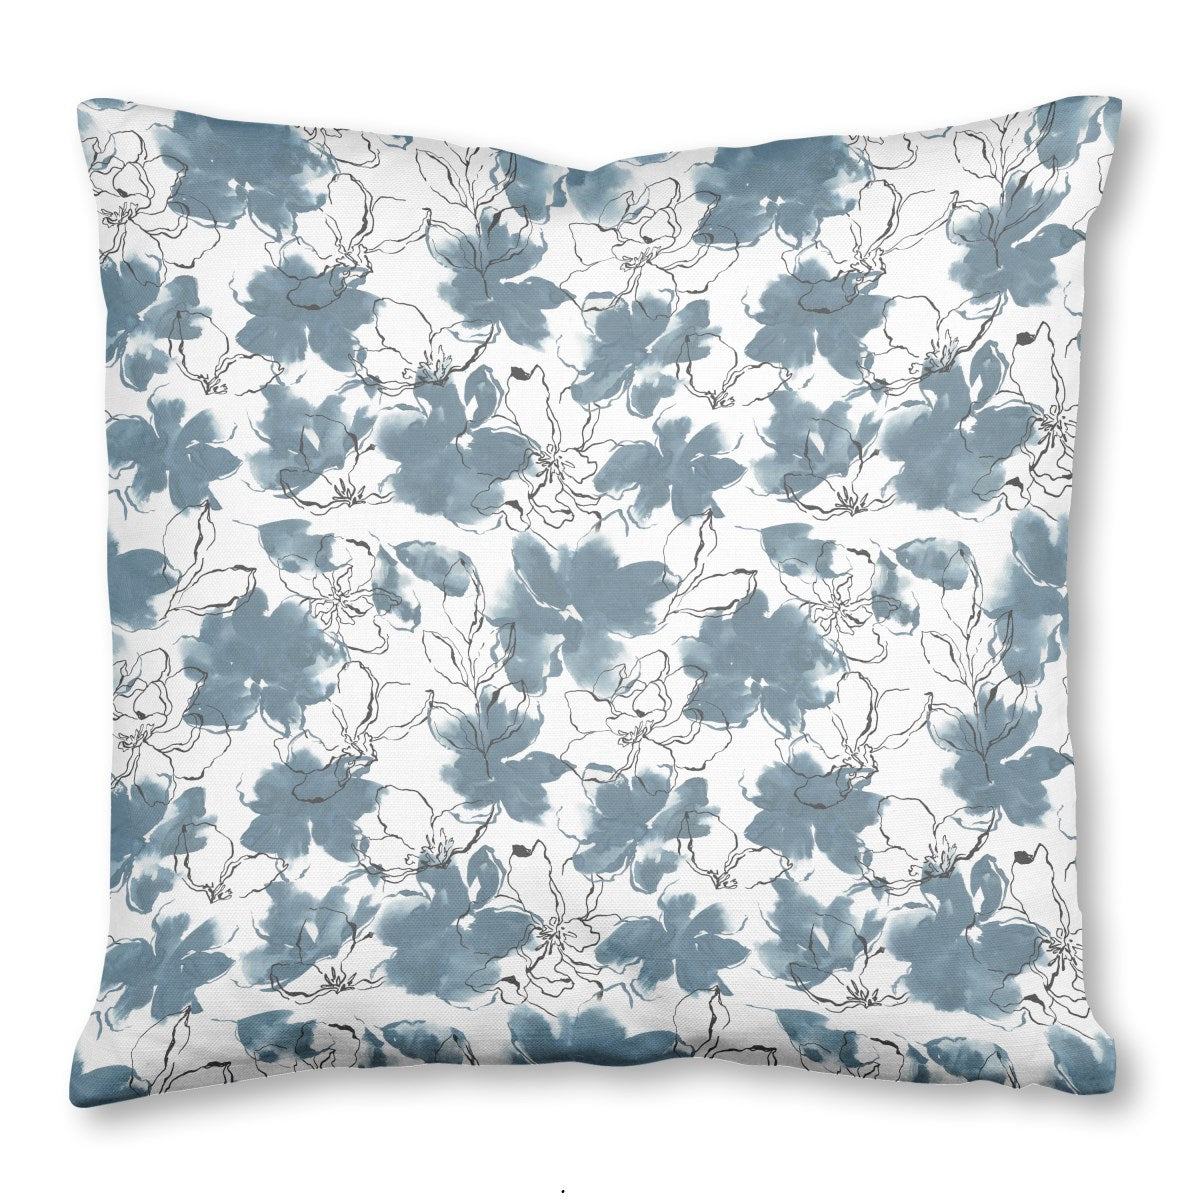 Blues in Bloom Throw Pillow